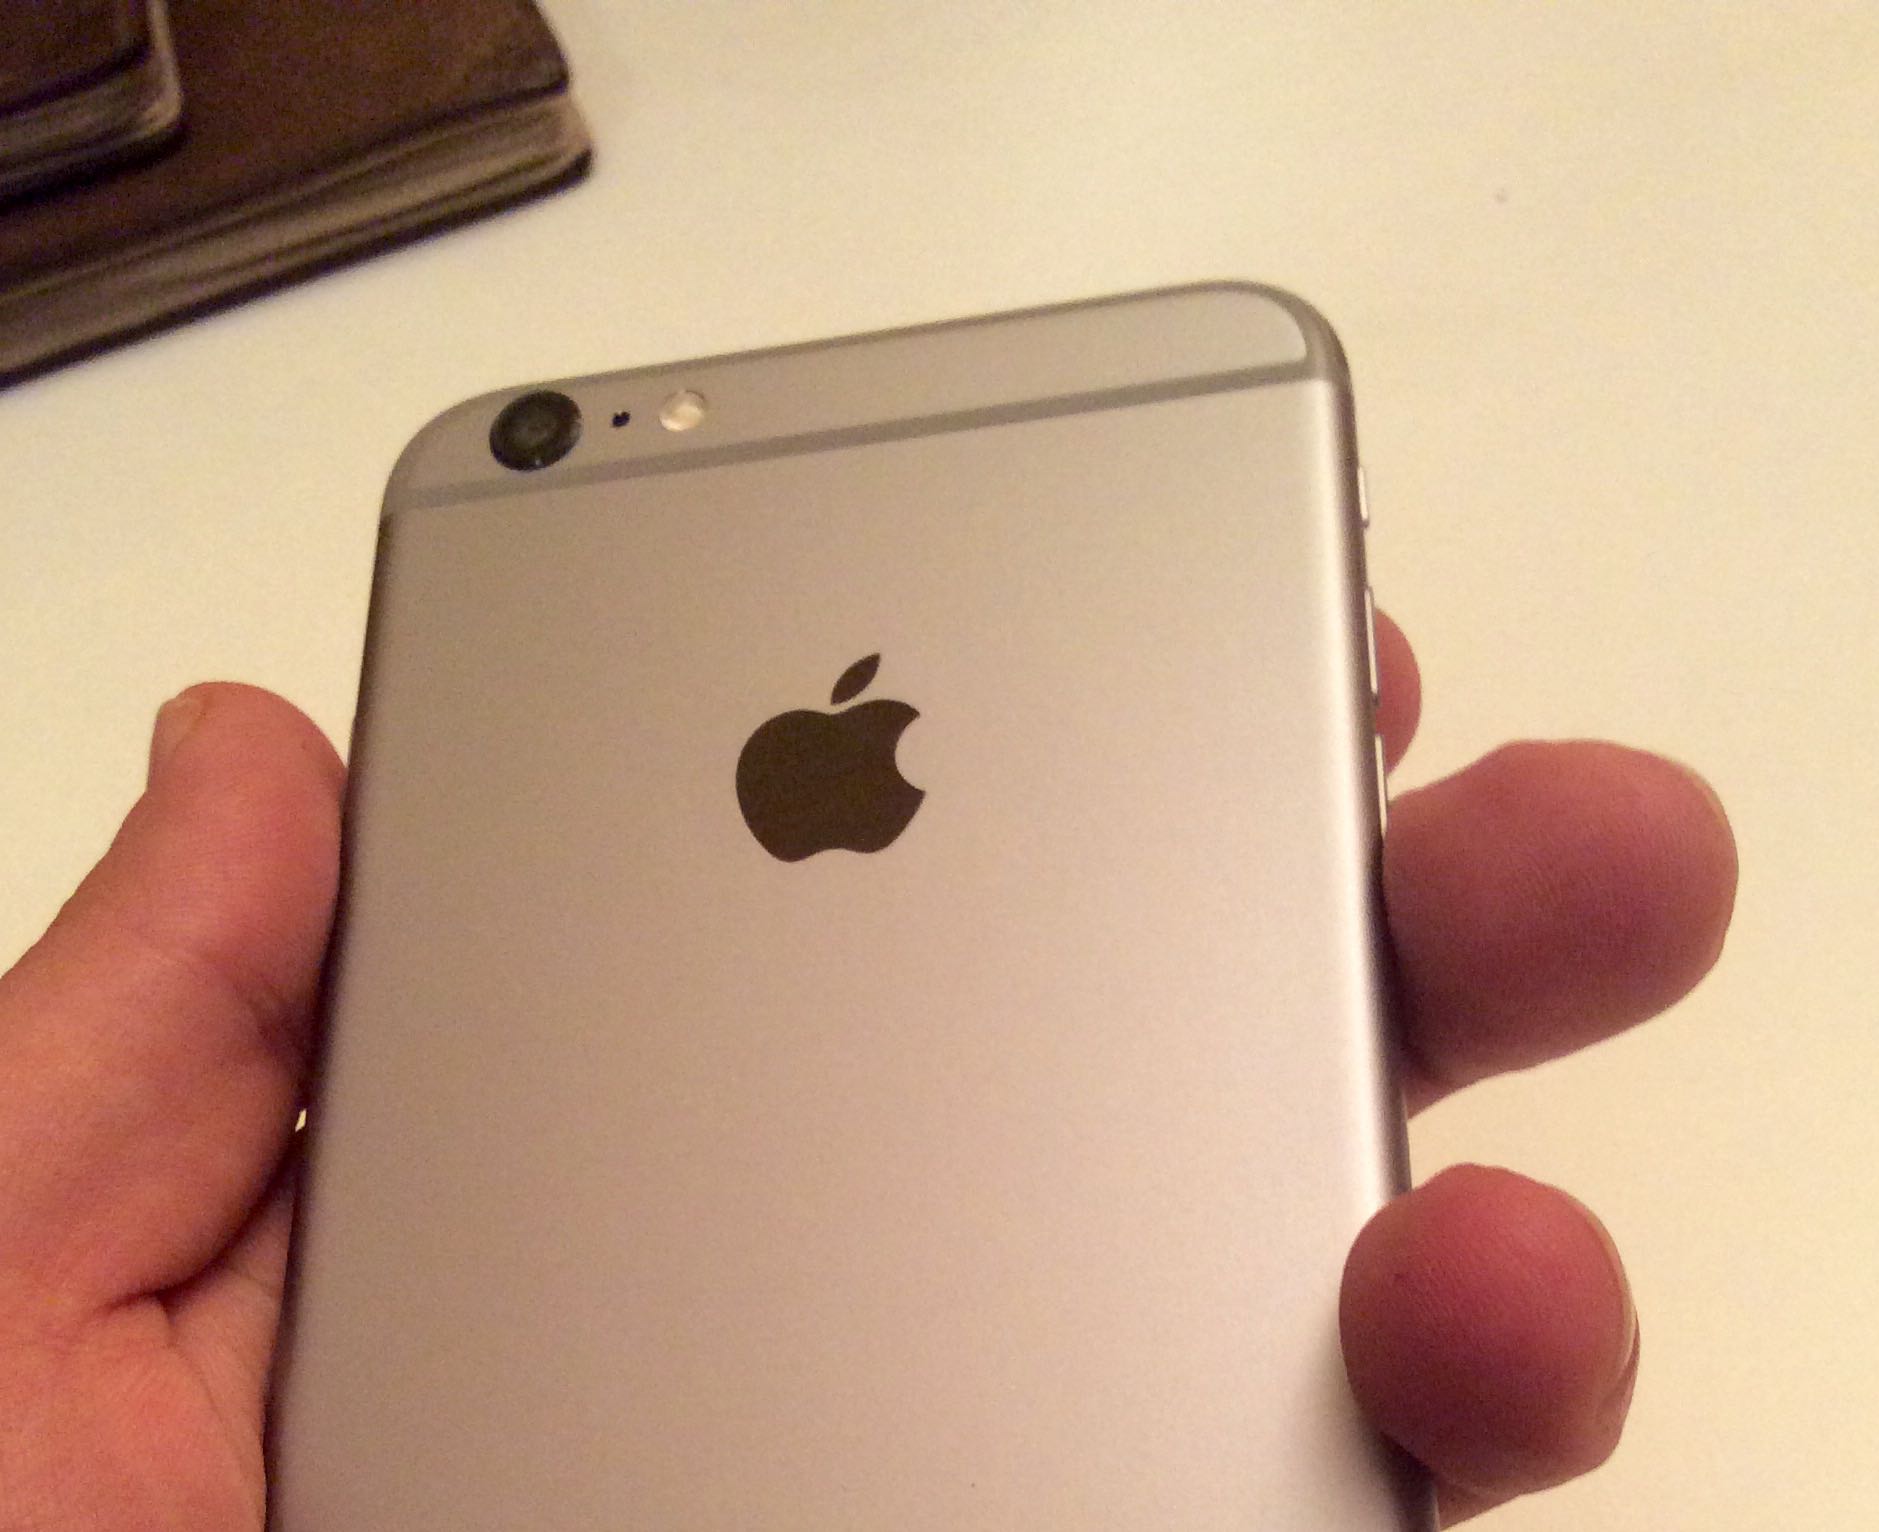 photo of Apple could become a carrier, new report claims image